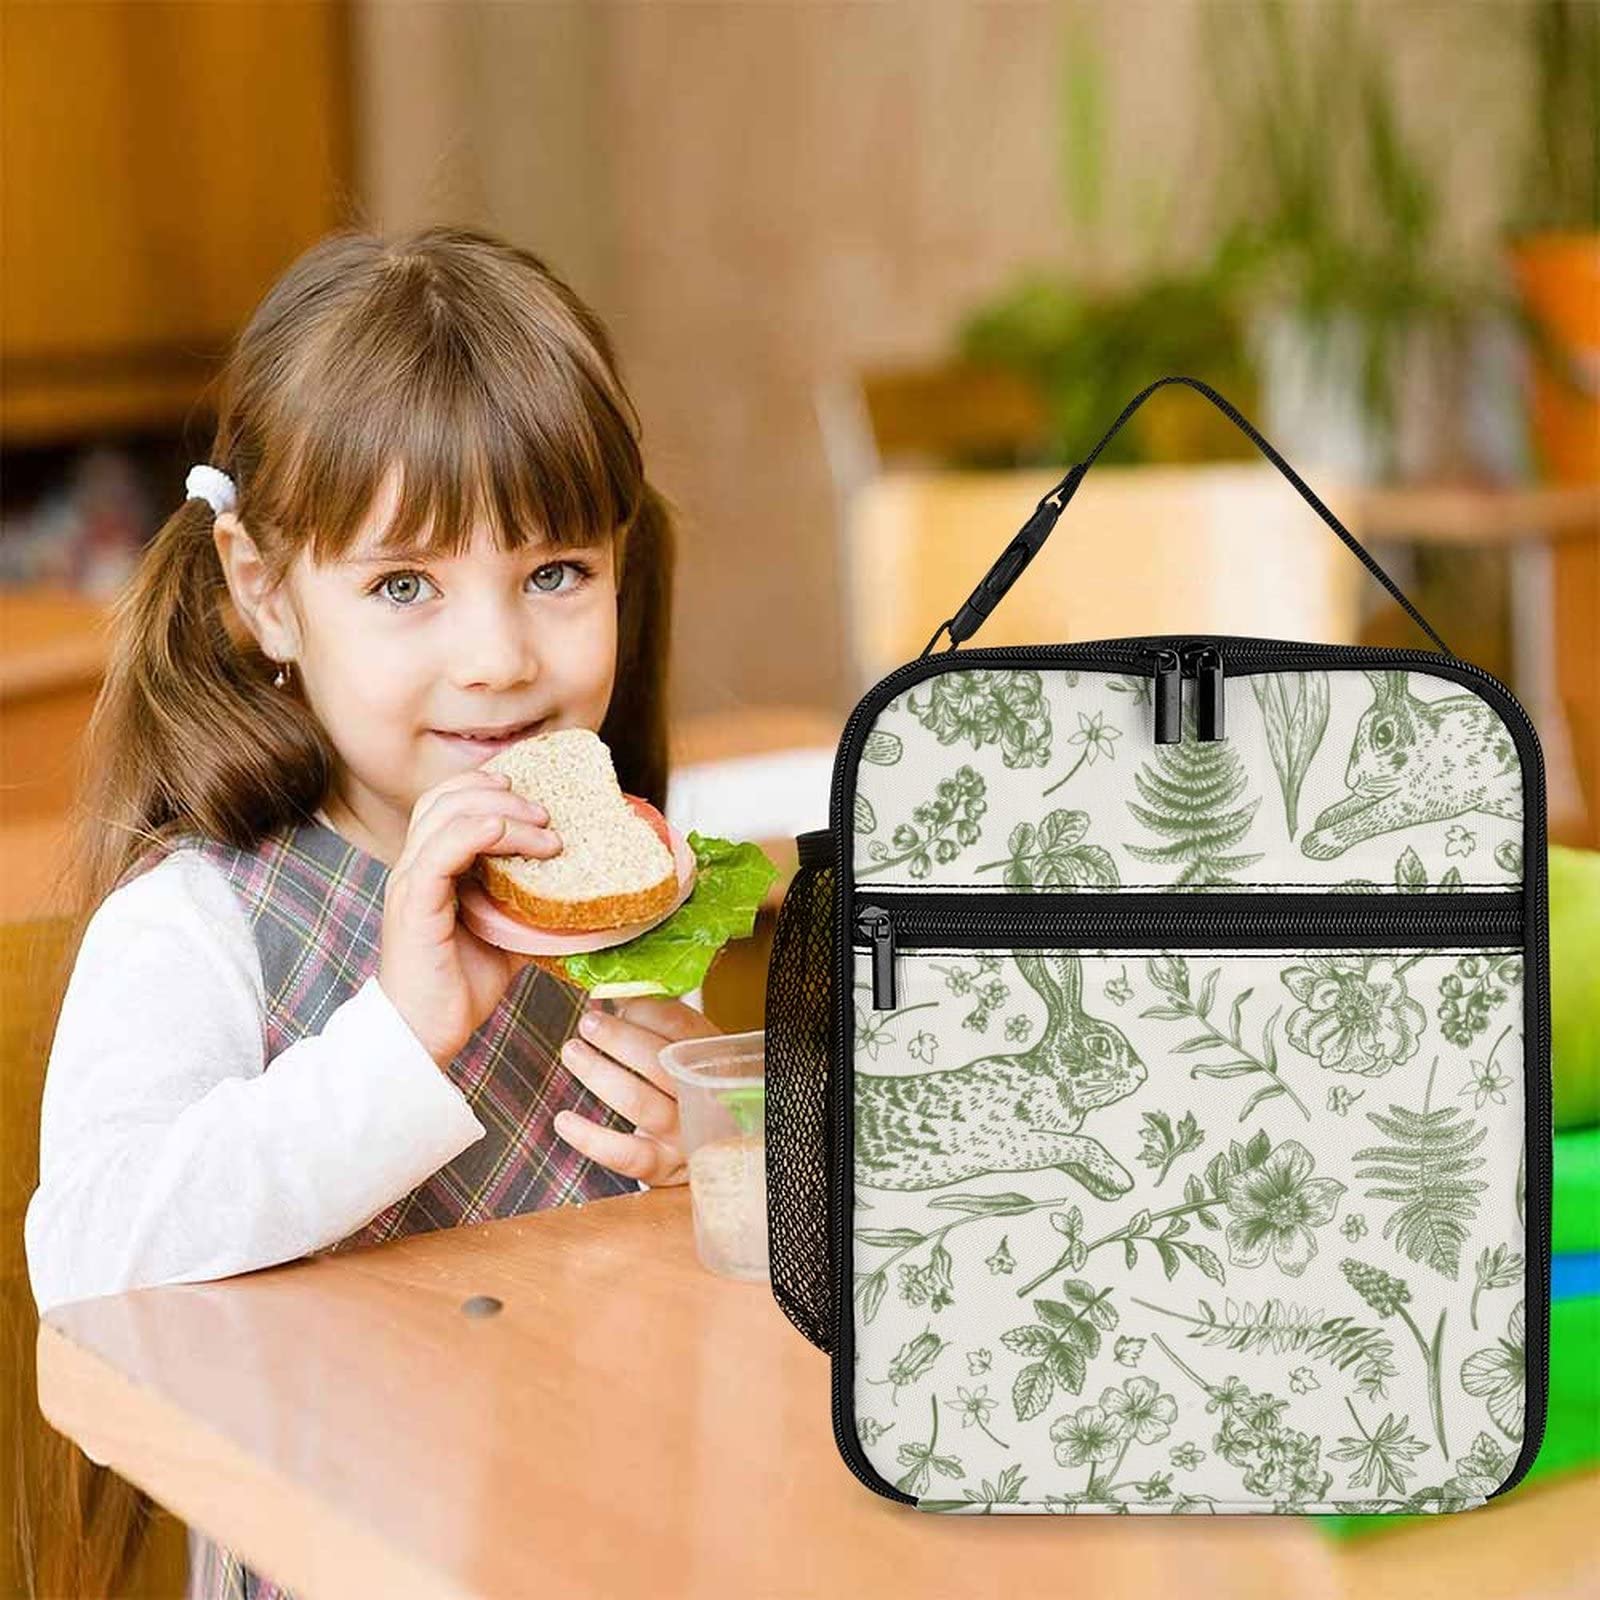 MINBHEBYUD Rabbits Lunch Bag for Men Women Adults, Insulated Lunch Bags for Office Work, Reusable Portable Lunch Bag